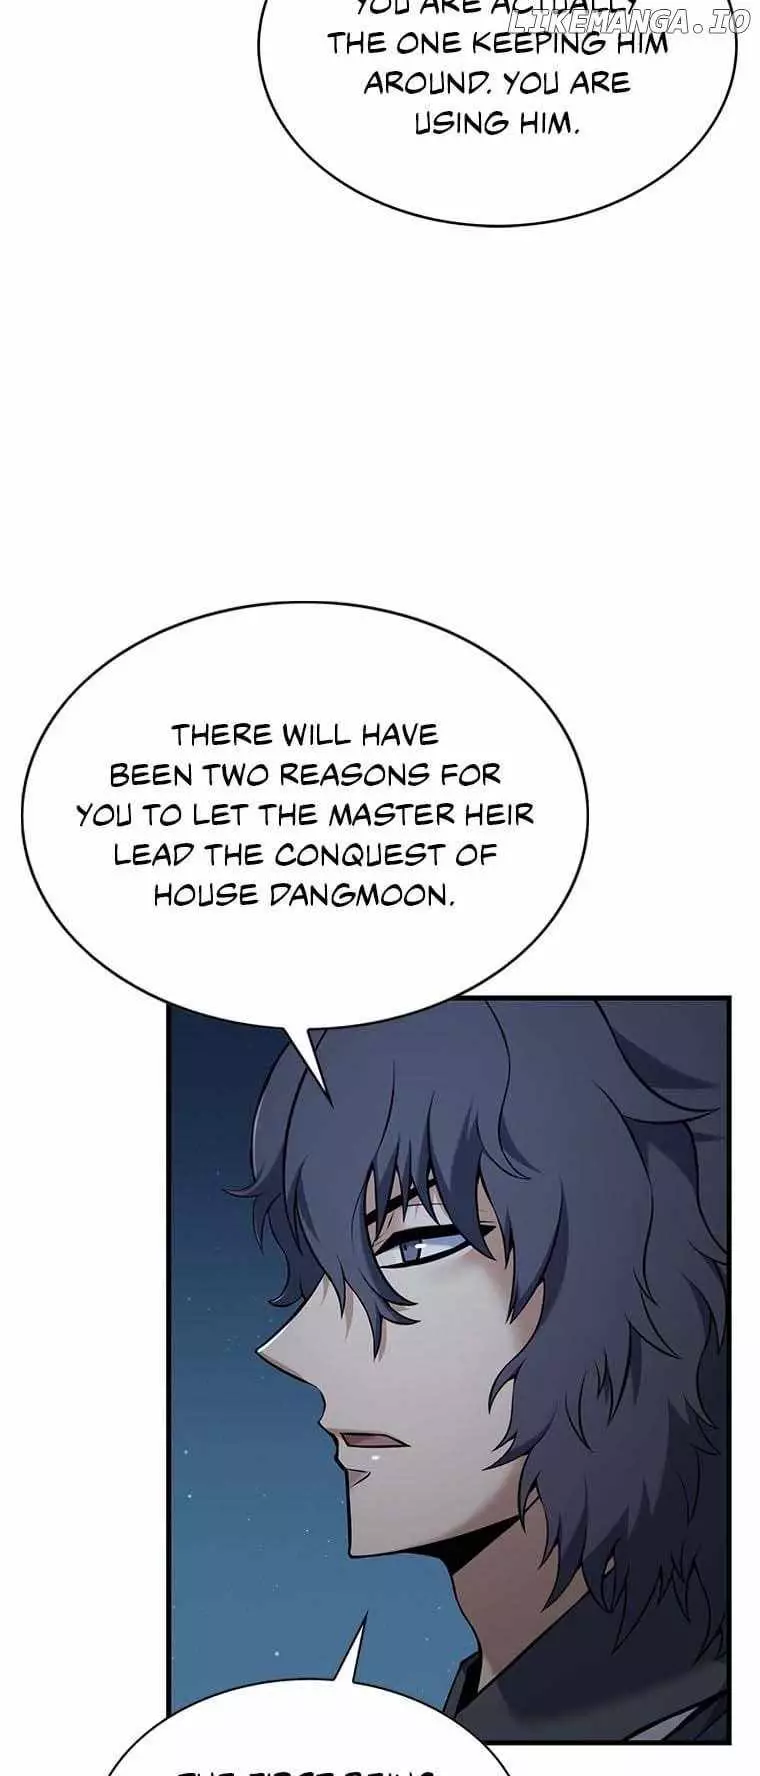 The Star Of A Supreme Ruler - 103 page 14-f3e5a55d